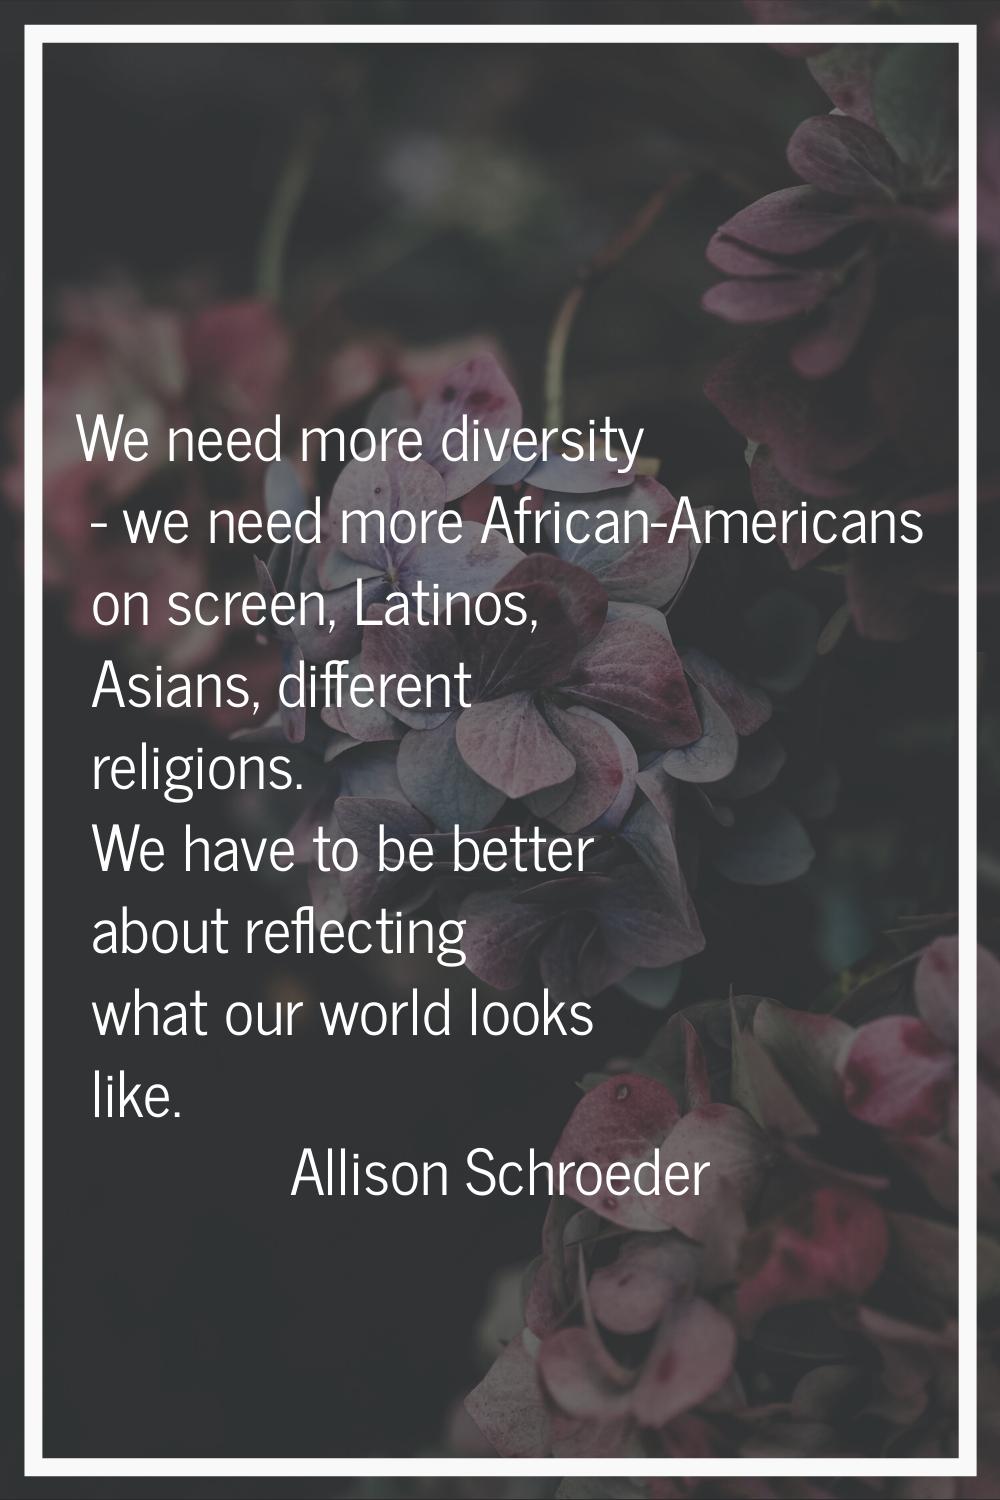 We need more diversity - we need more African-Americans on screen, Latinos, Asians, different relig